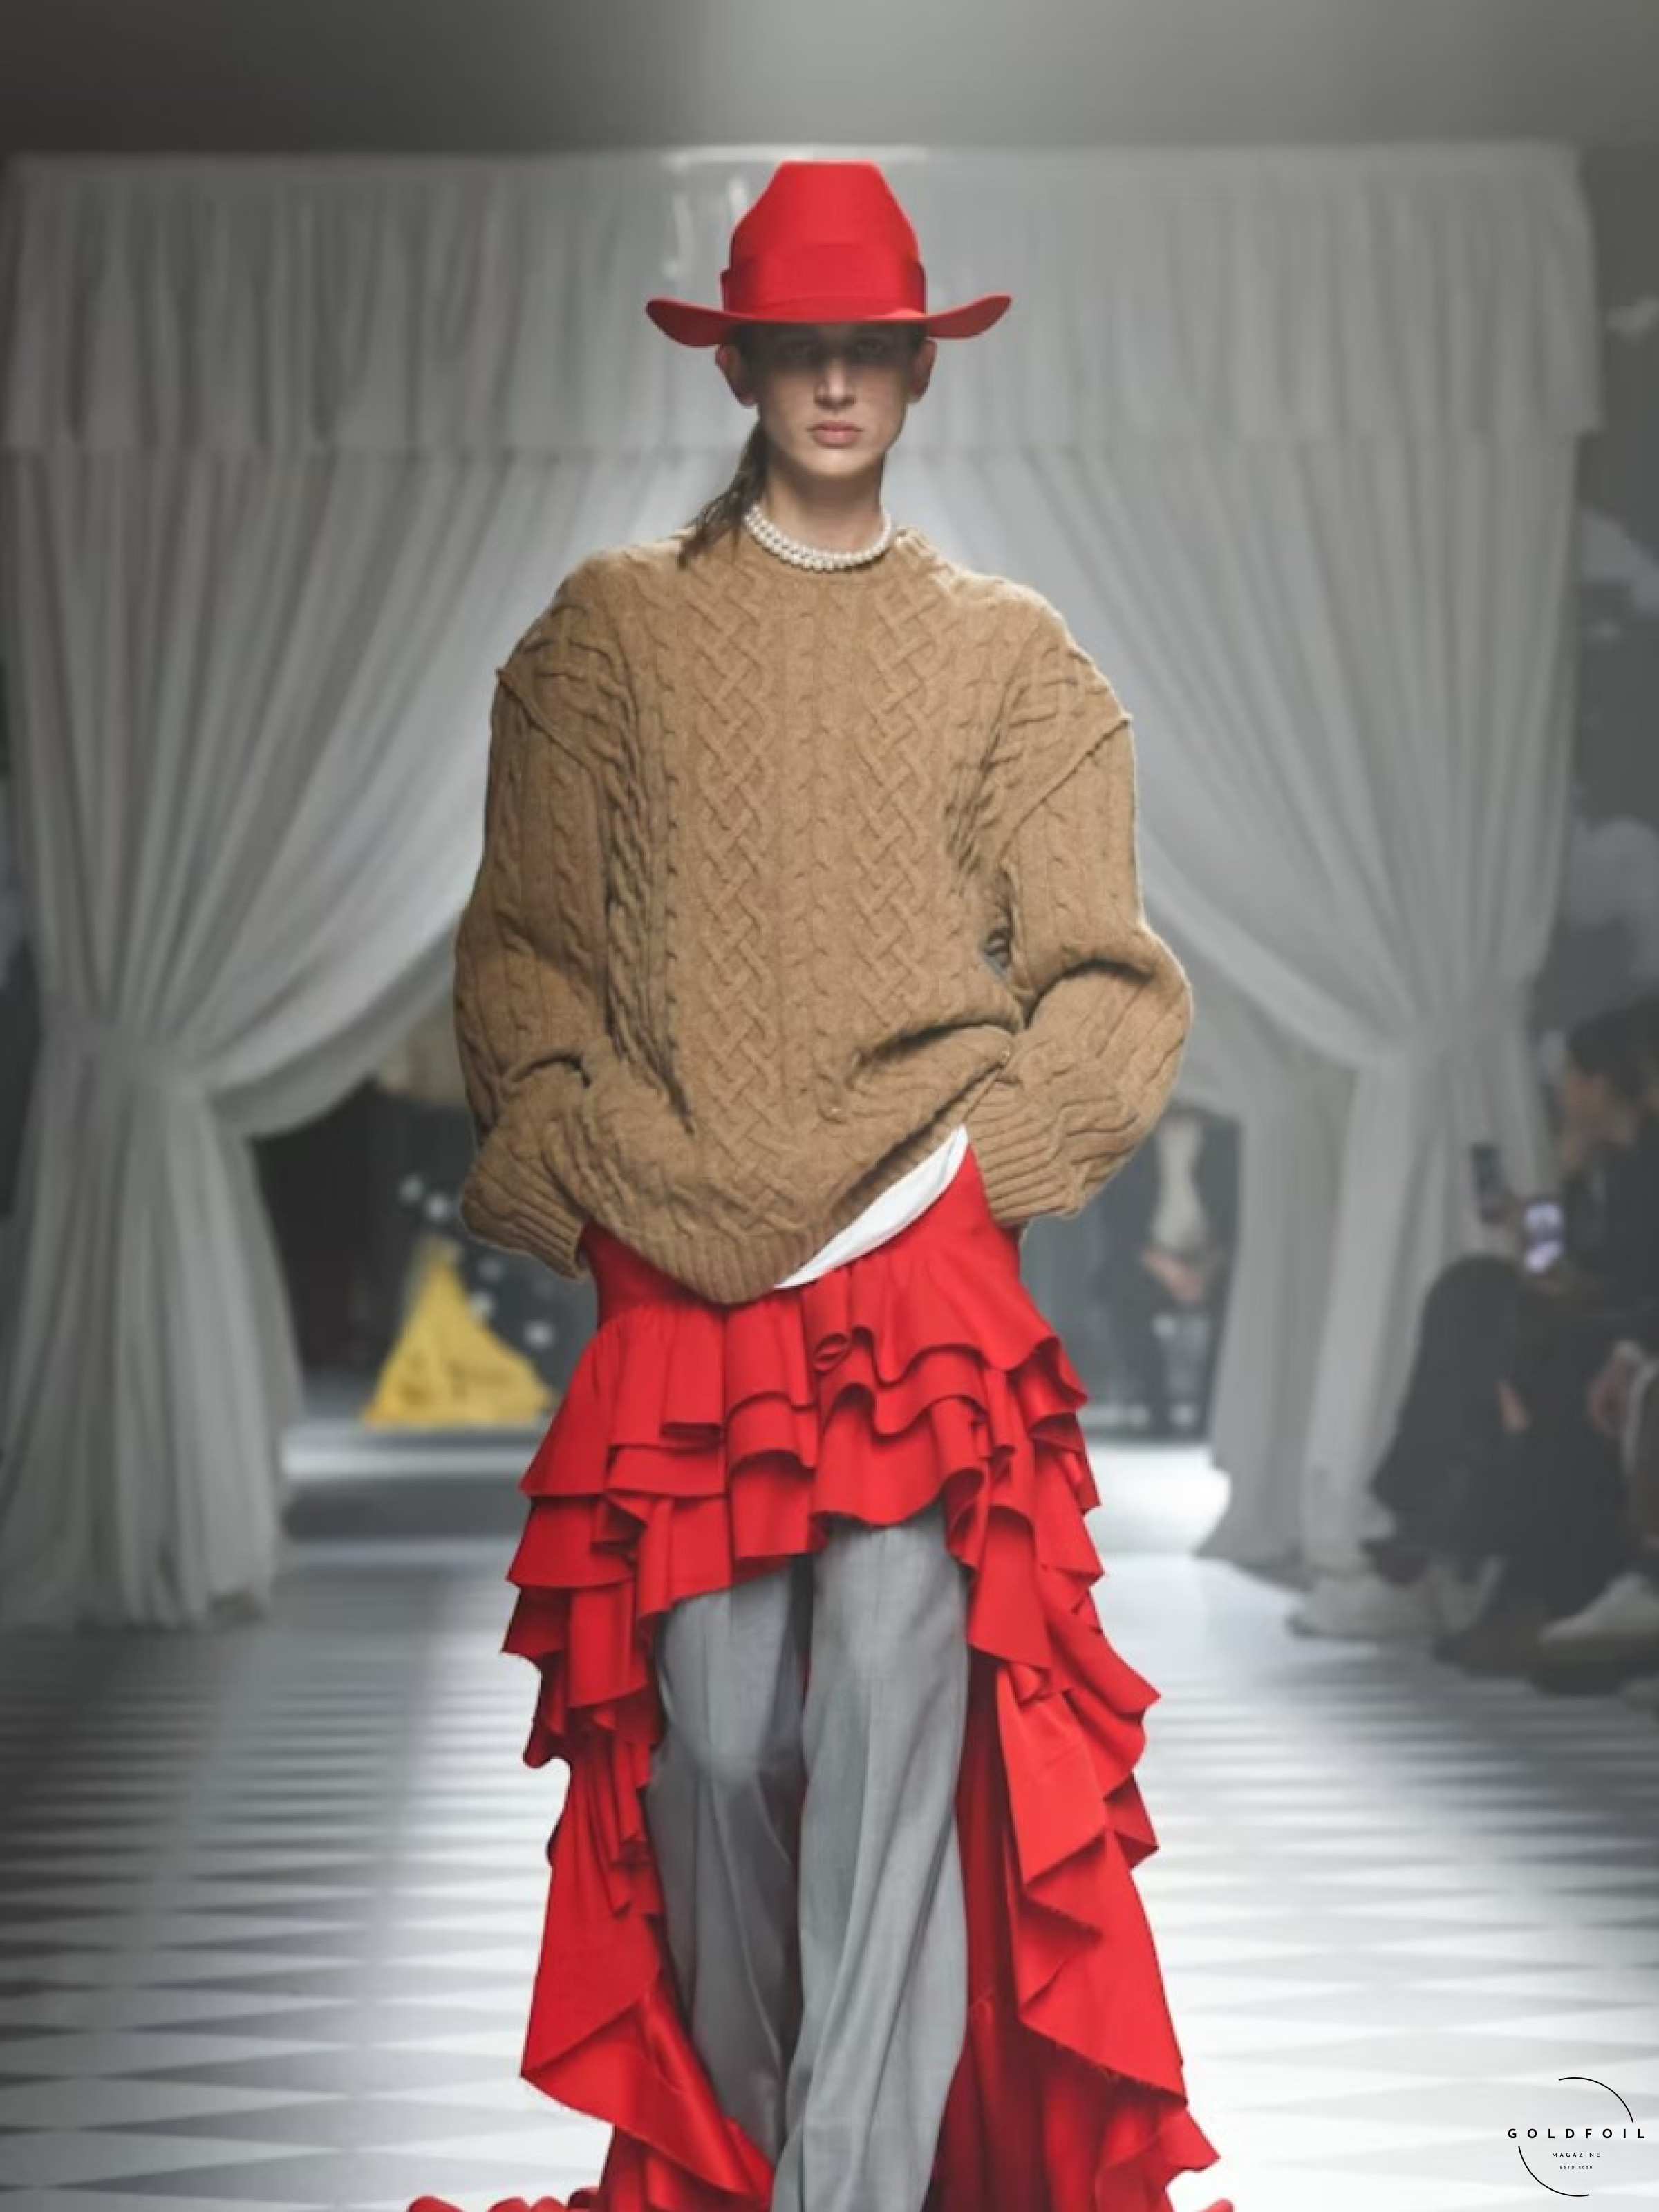 Adrian Appiolaza presented his first runway show for the Moschino brand as part of Milan Fashion Week. Model walking on the runway wearing a long fringe red skirt, with smart flary grey trousers, a white top, pearl necklace and a knitted tan jumper on top with a red hat